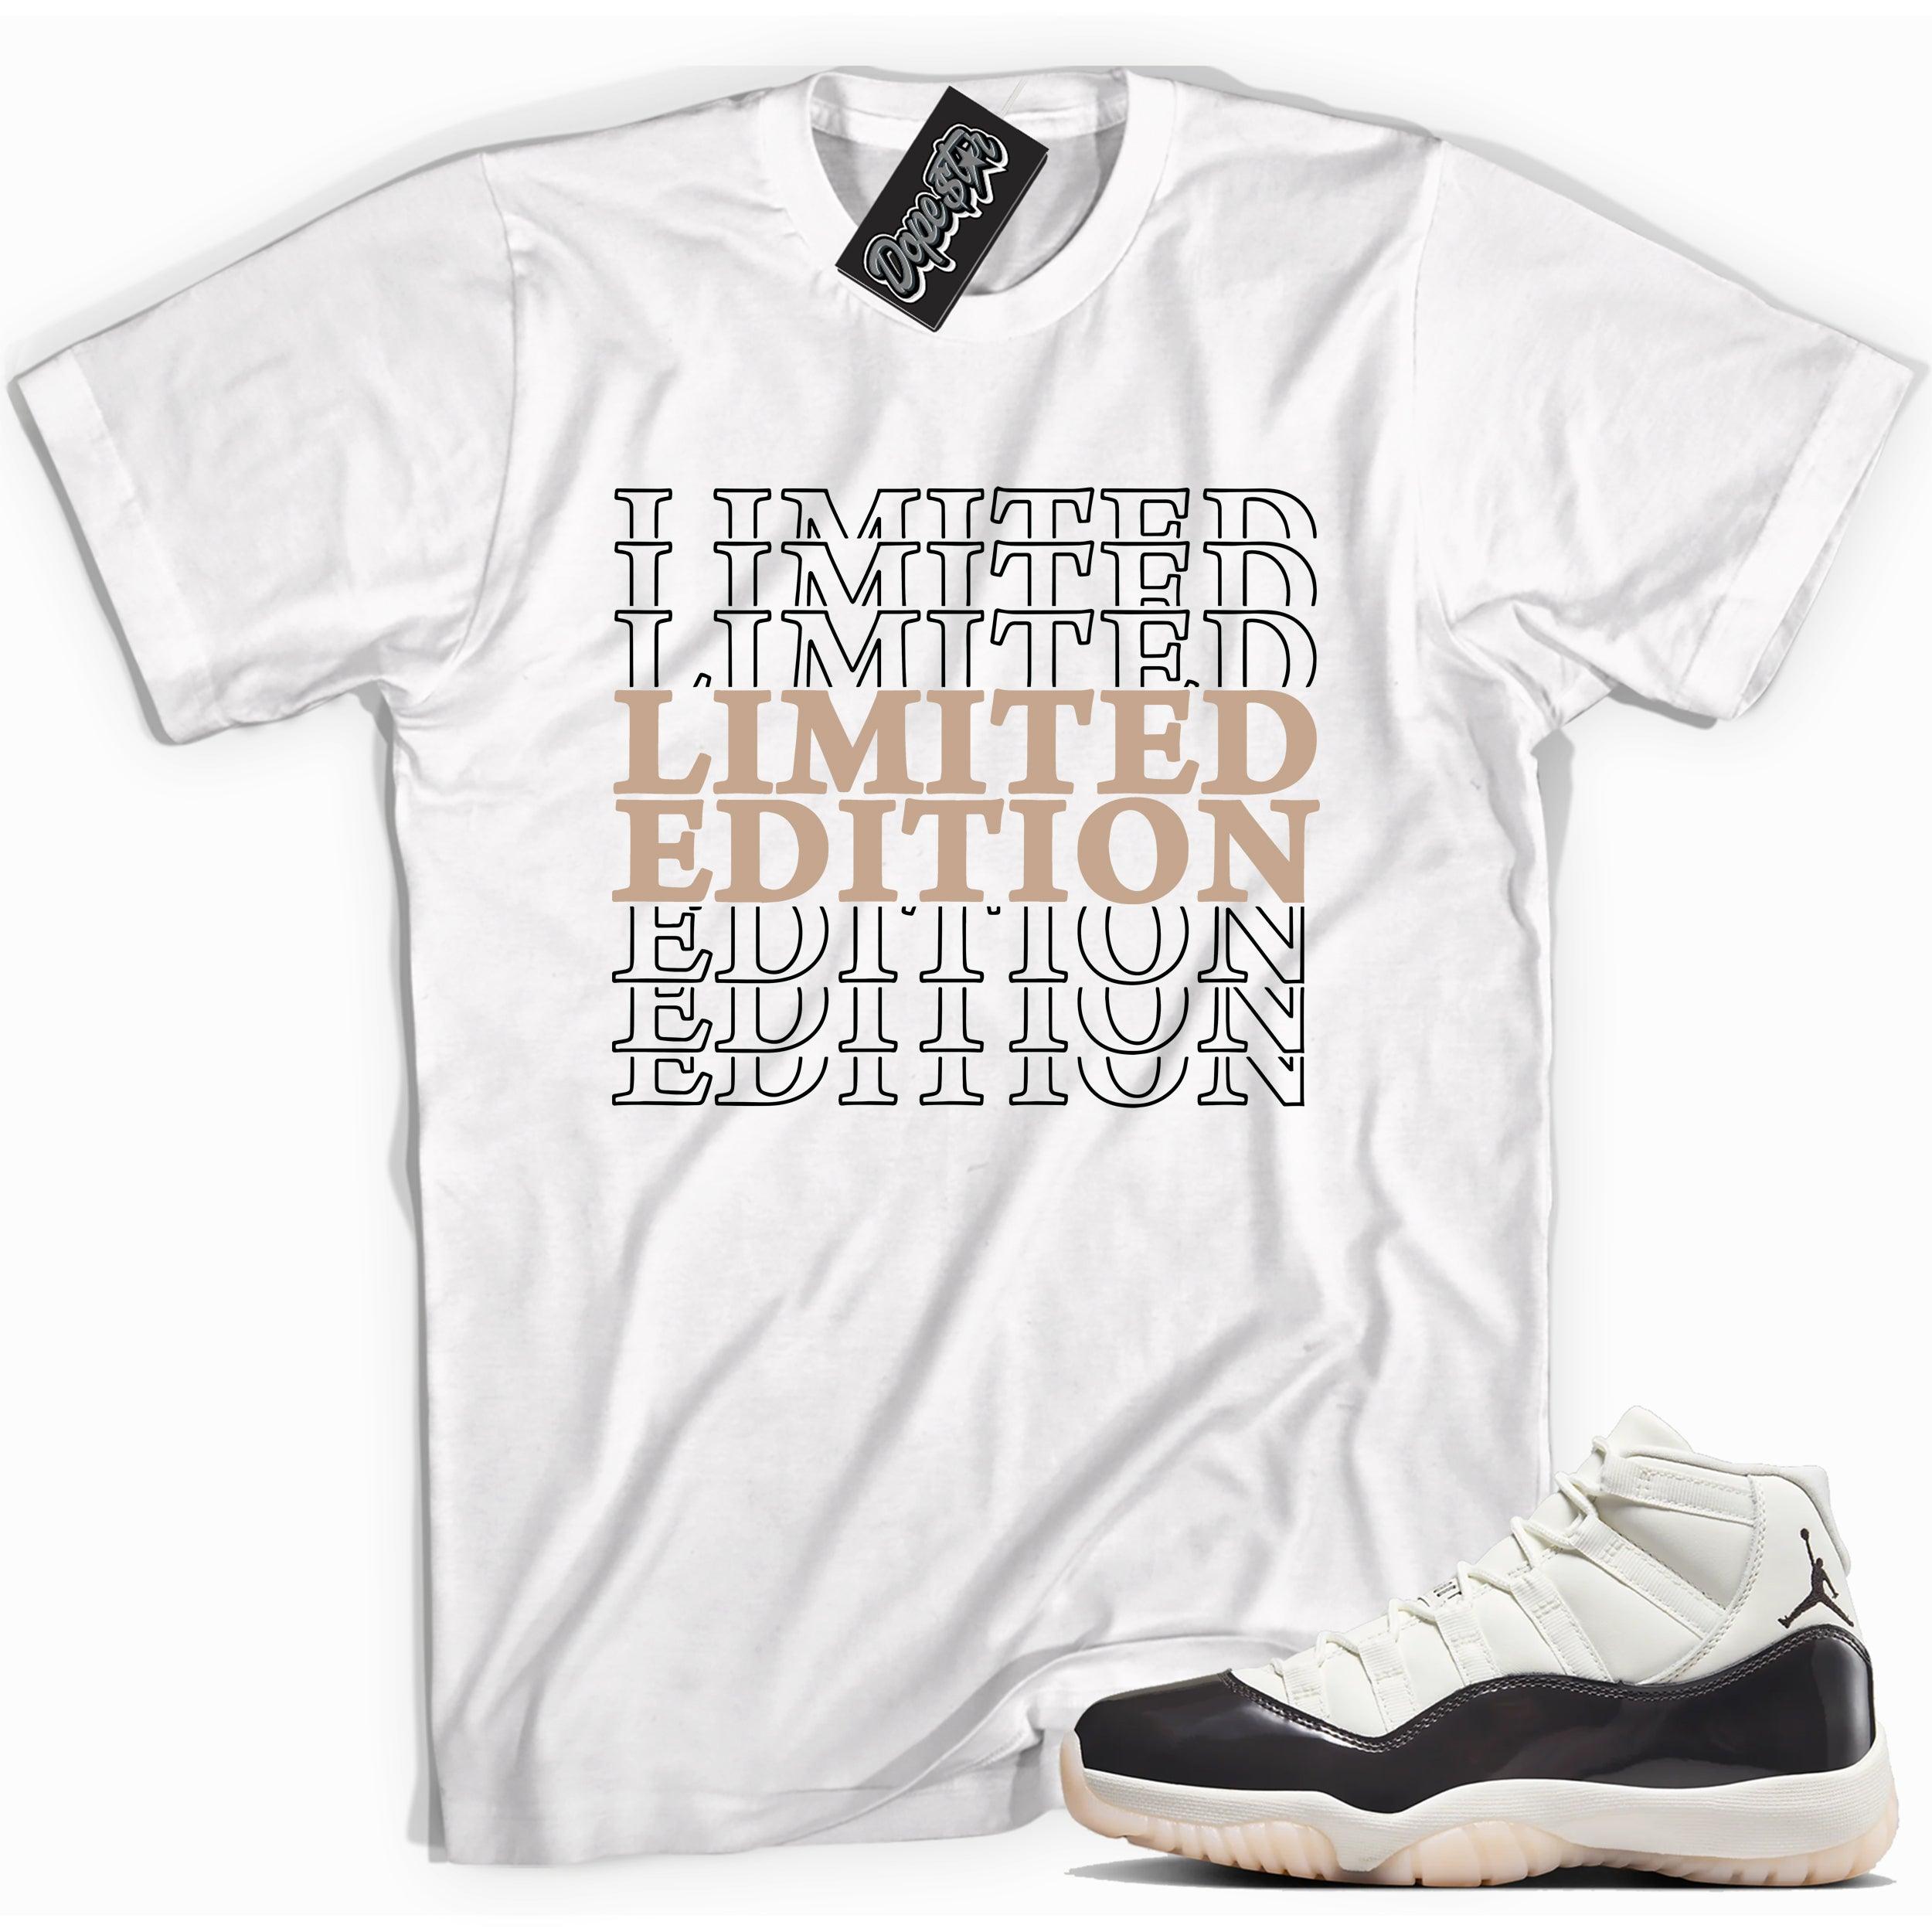 Cool White graphic tee with “ Limited Edition ” print, that perfectly matches Air Jordan 11 Neapolitan sneakers